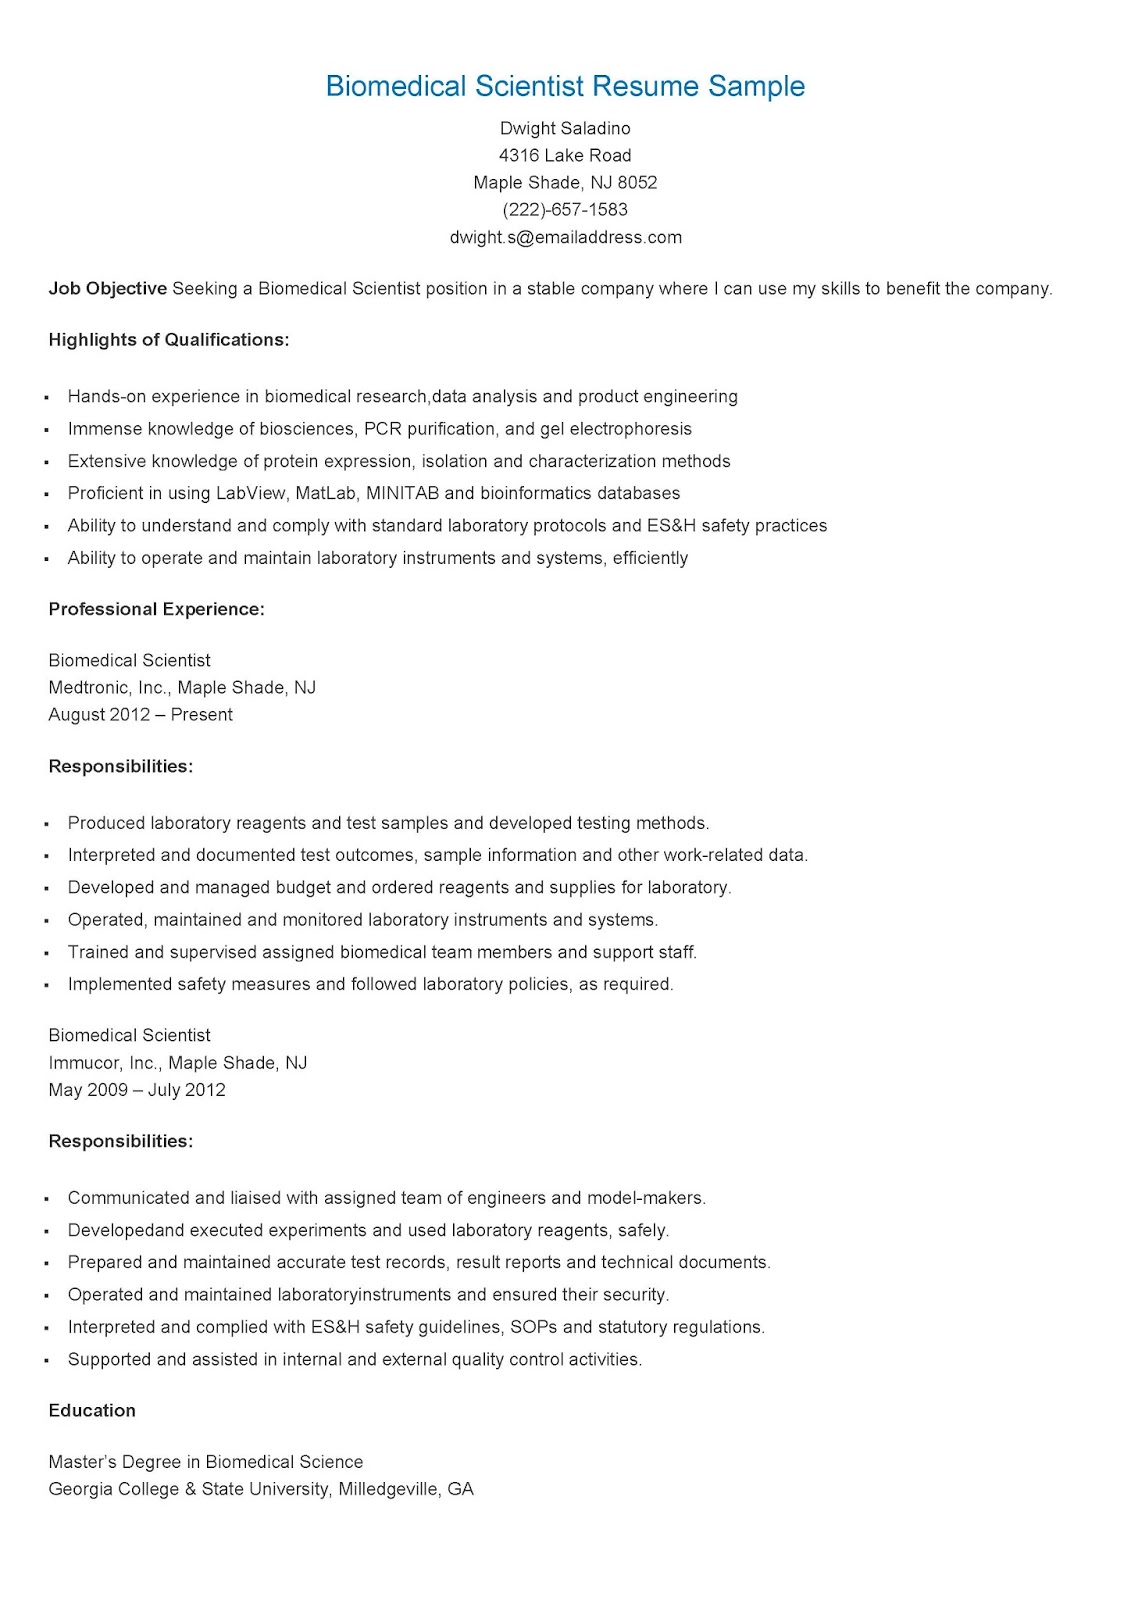 Promotional resume example